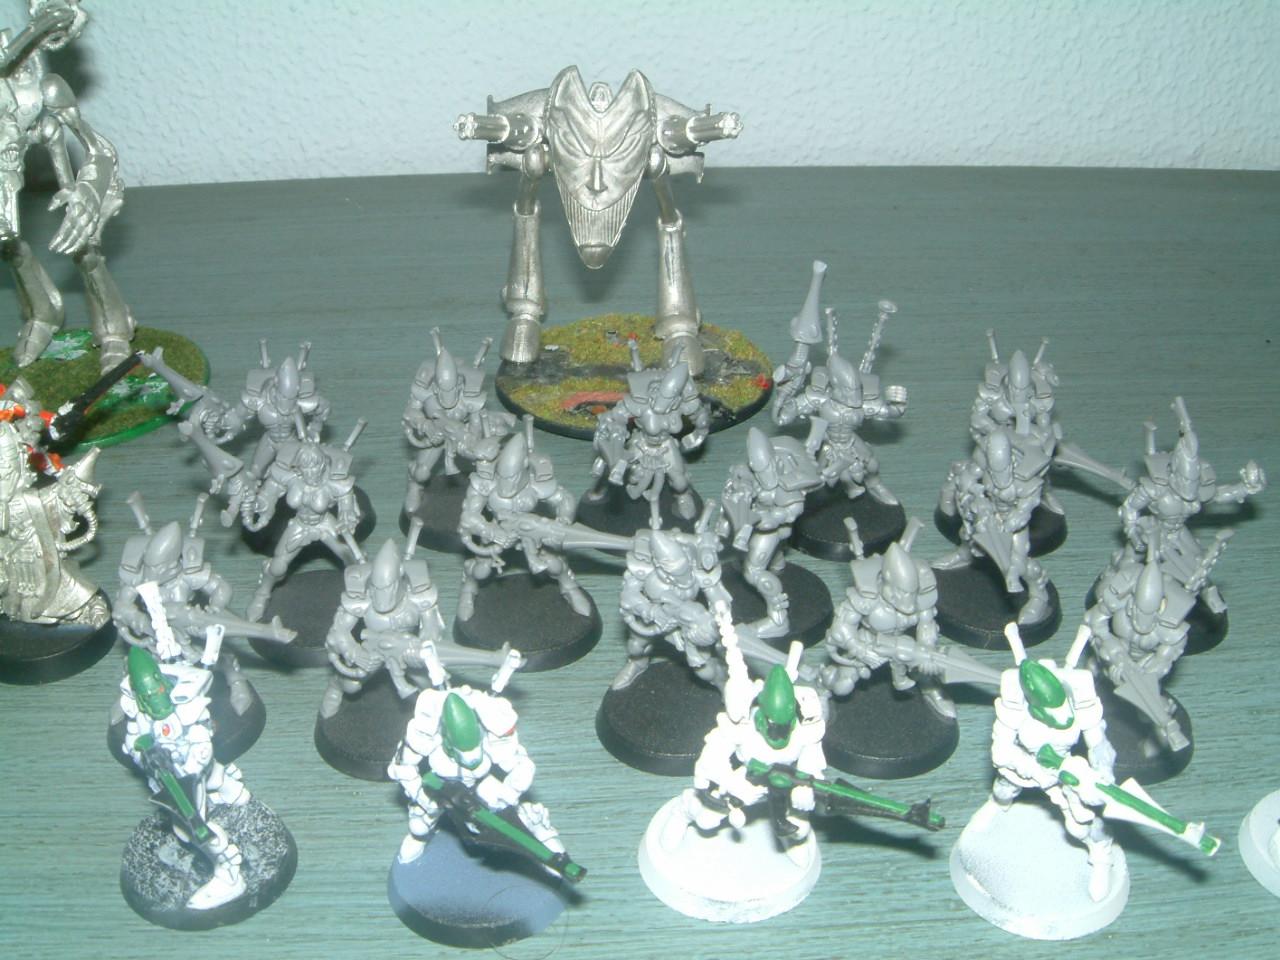 Army, Bearers, Black, Chaos, Command, Dreadnought, Eldar, Legion, Nurgle, Pl, Scratch Build, Soldier, Space, Space Marines, Word